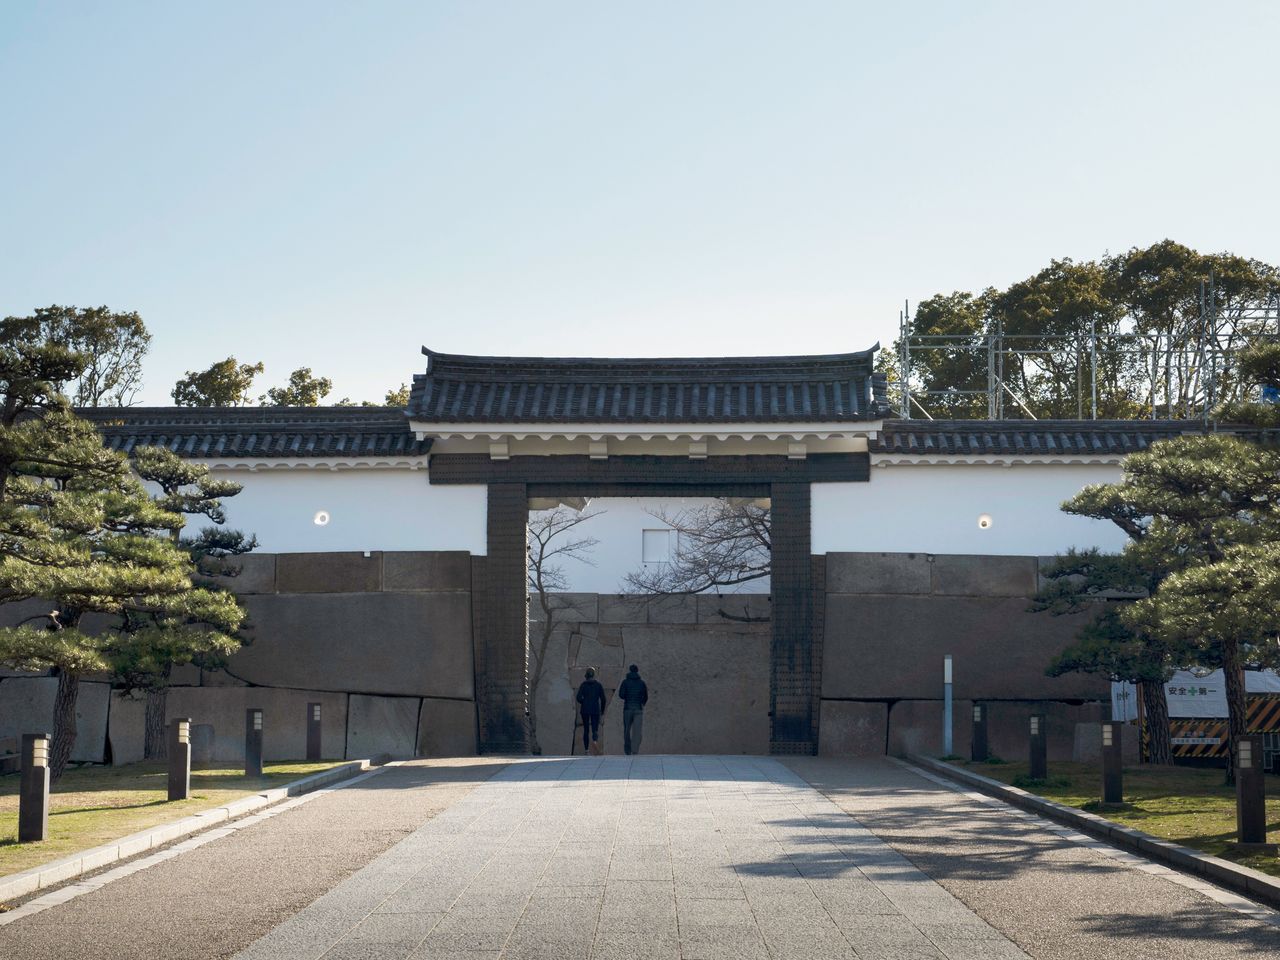 The Ōtemon Gate at the castle’s front entrance.